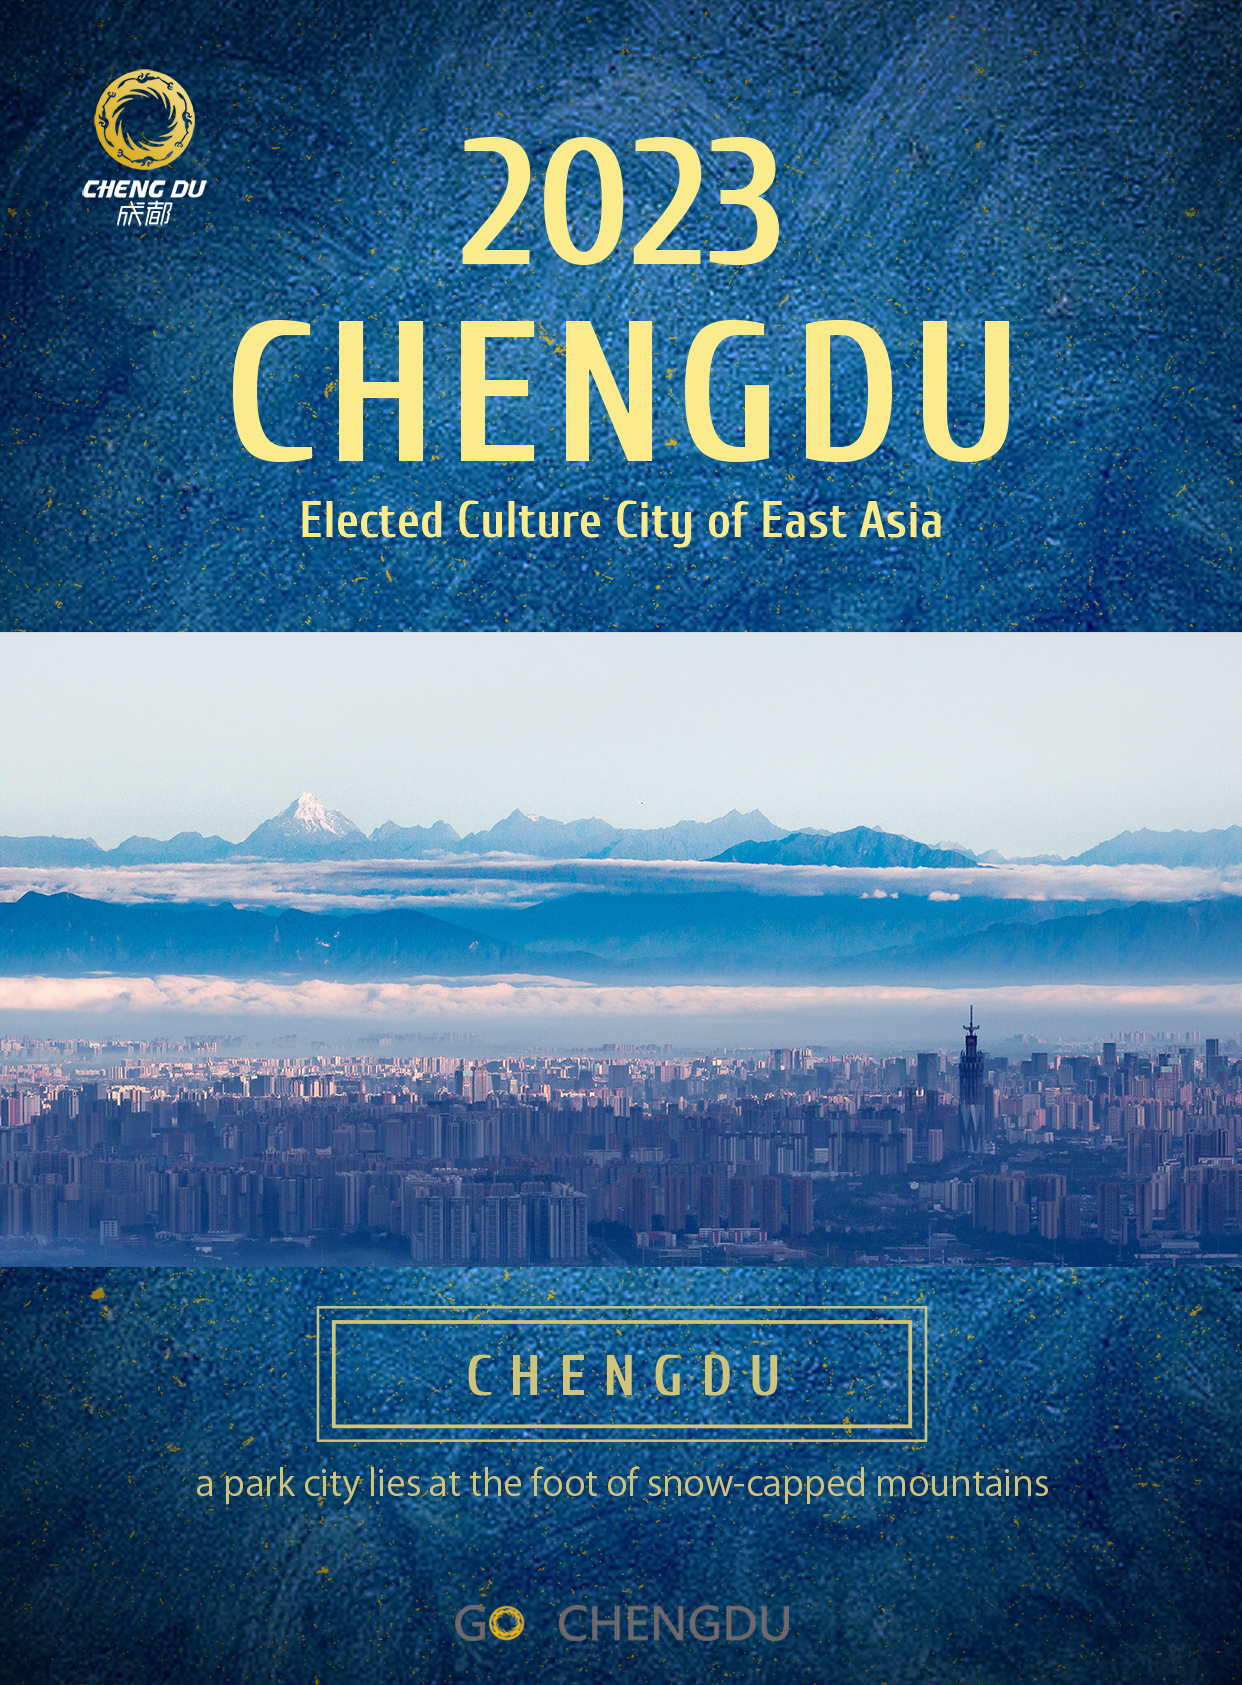 Chengdu Awarded as Culture City of East Asia in 2023